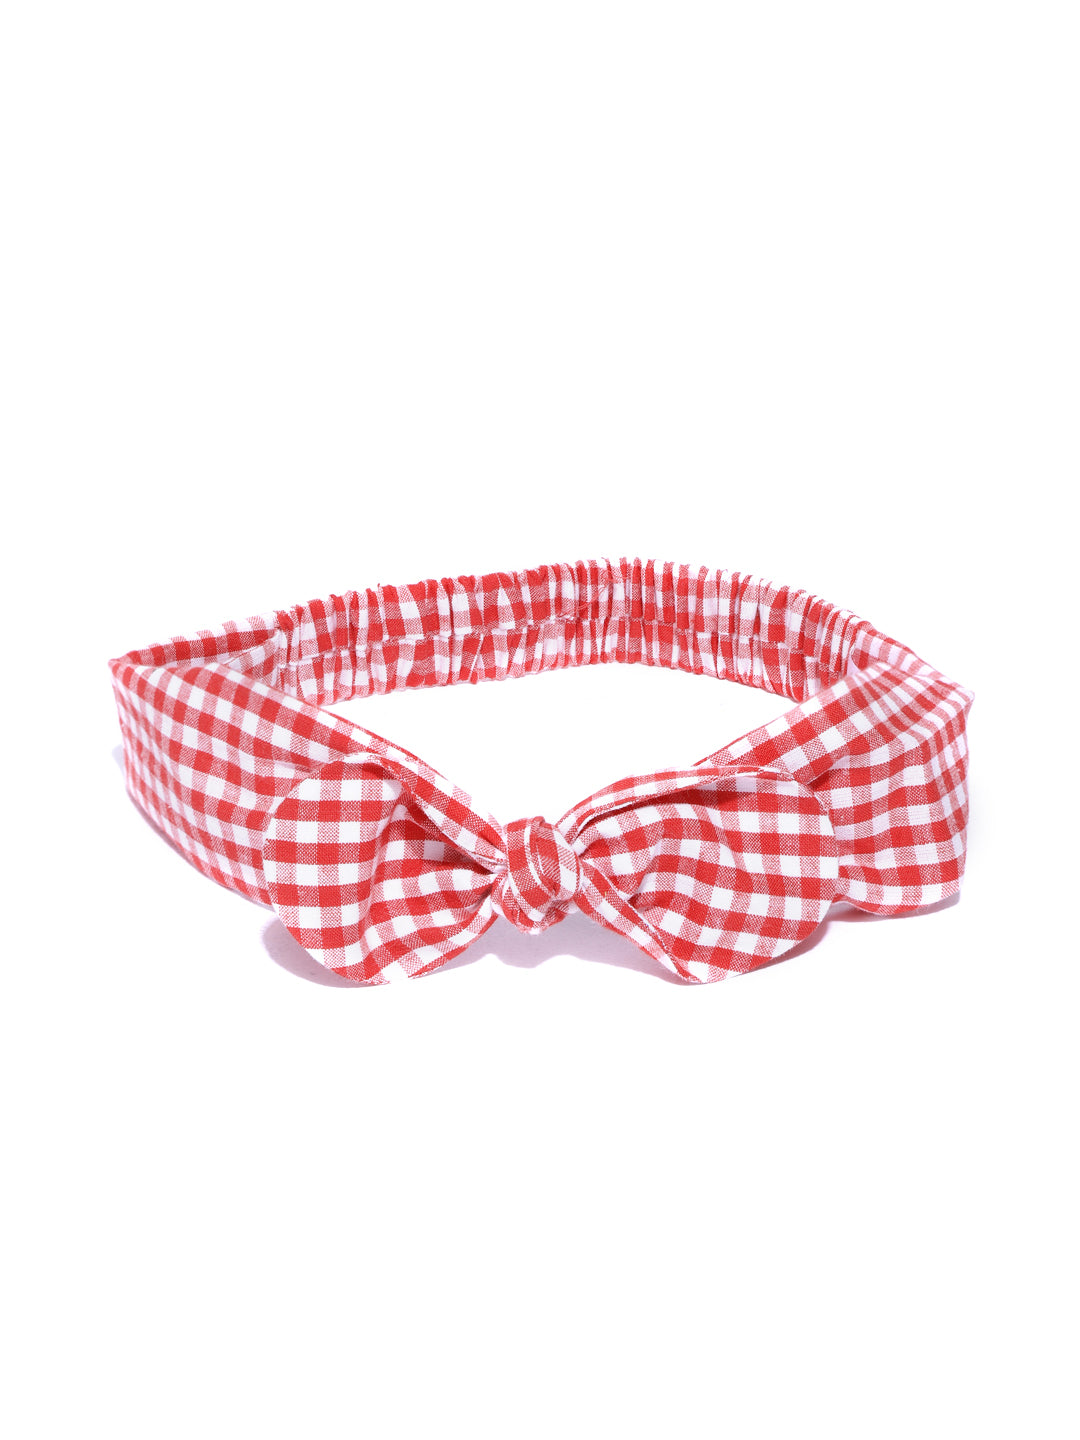 Blueberry red & white check pattern bunny knot hairband